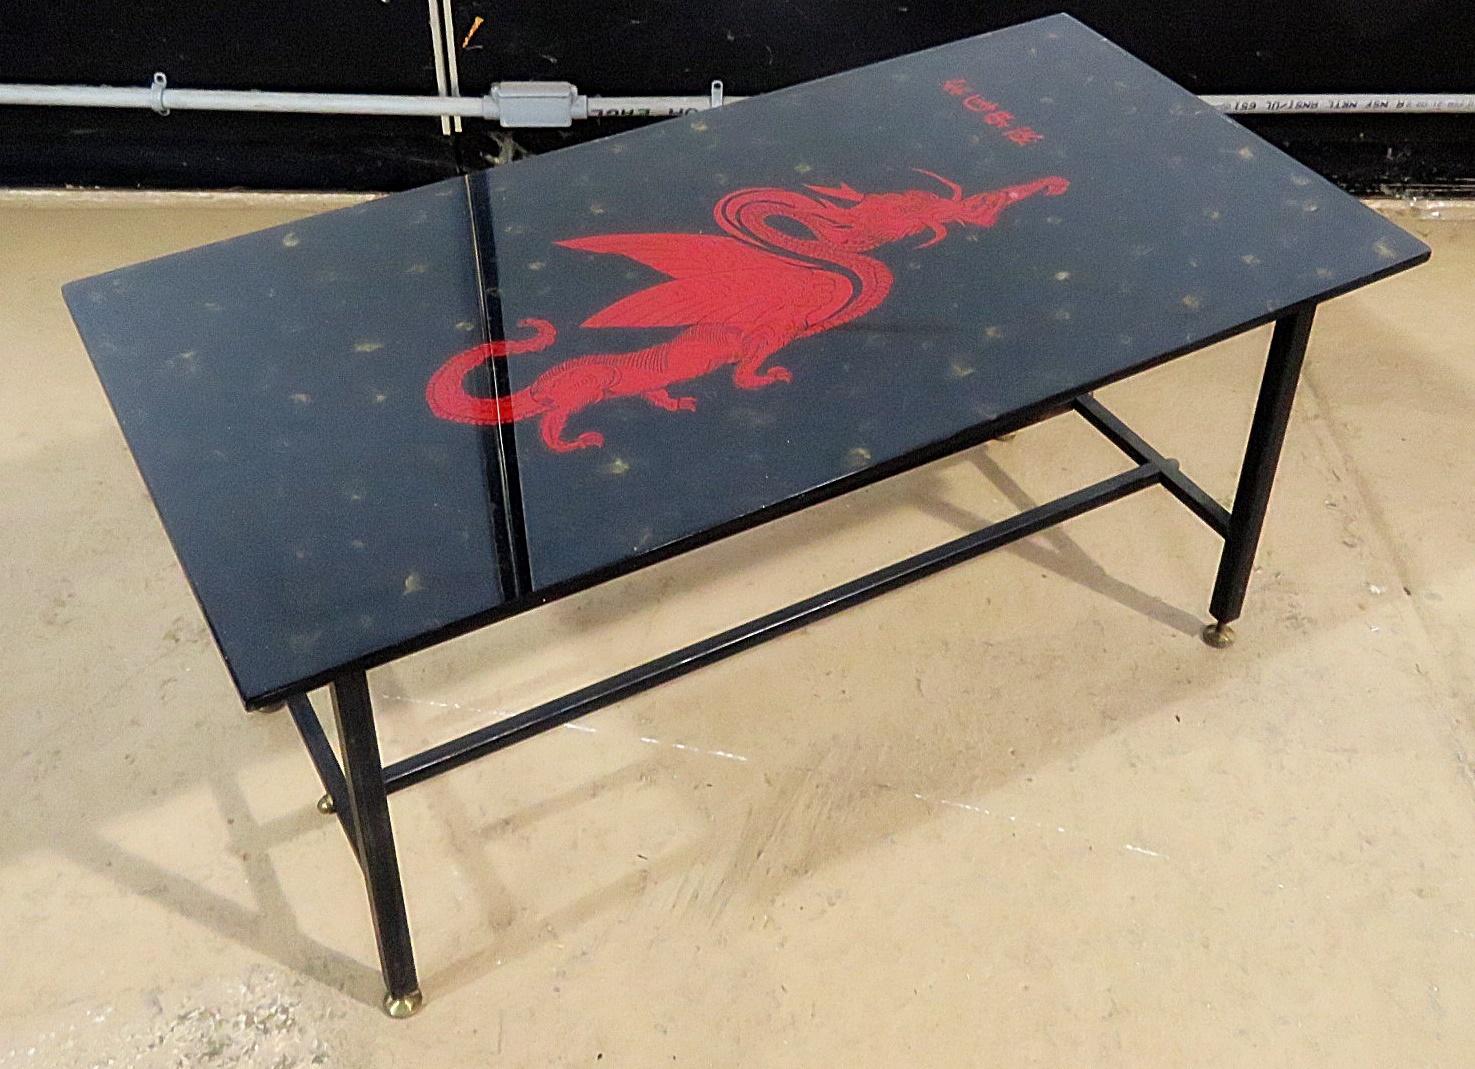 Oriental smoked glass top coffee table with a dragon design on a metal frame with brass feet.